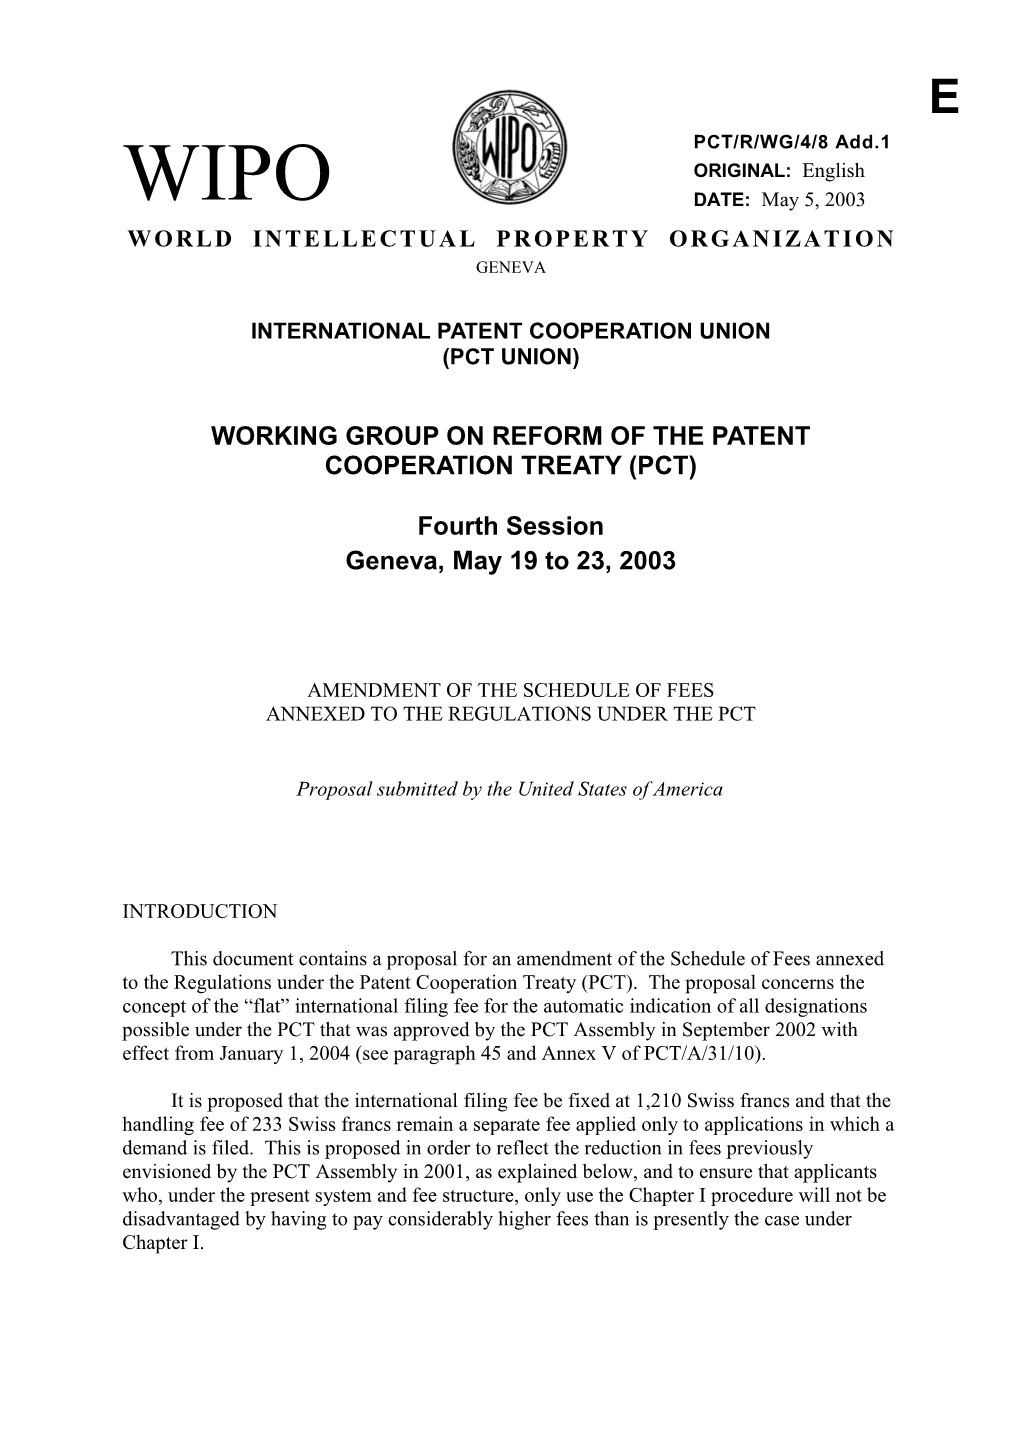 PCT/R/WG/4/8 ADD.1: Amendment of the Schedule of Fees Annexed to the Regulations Under